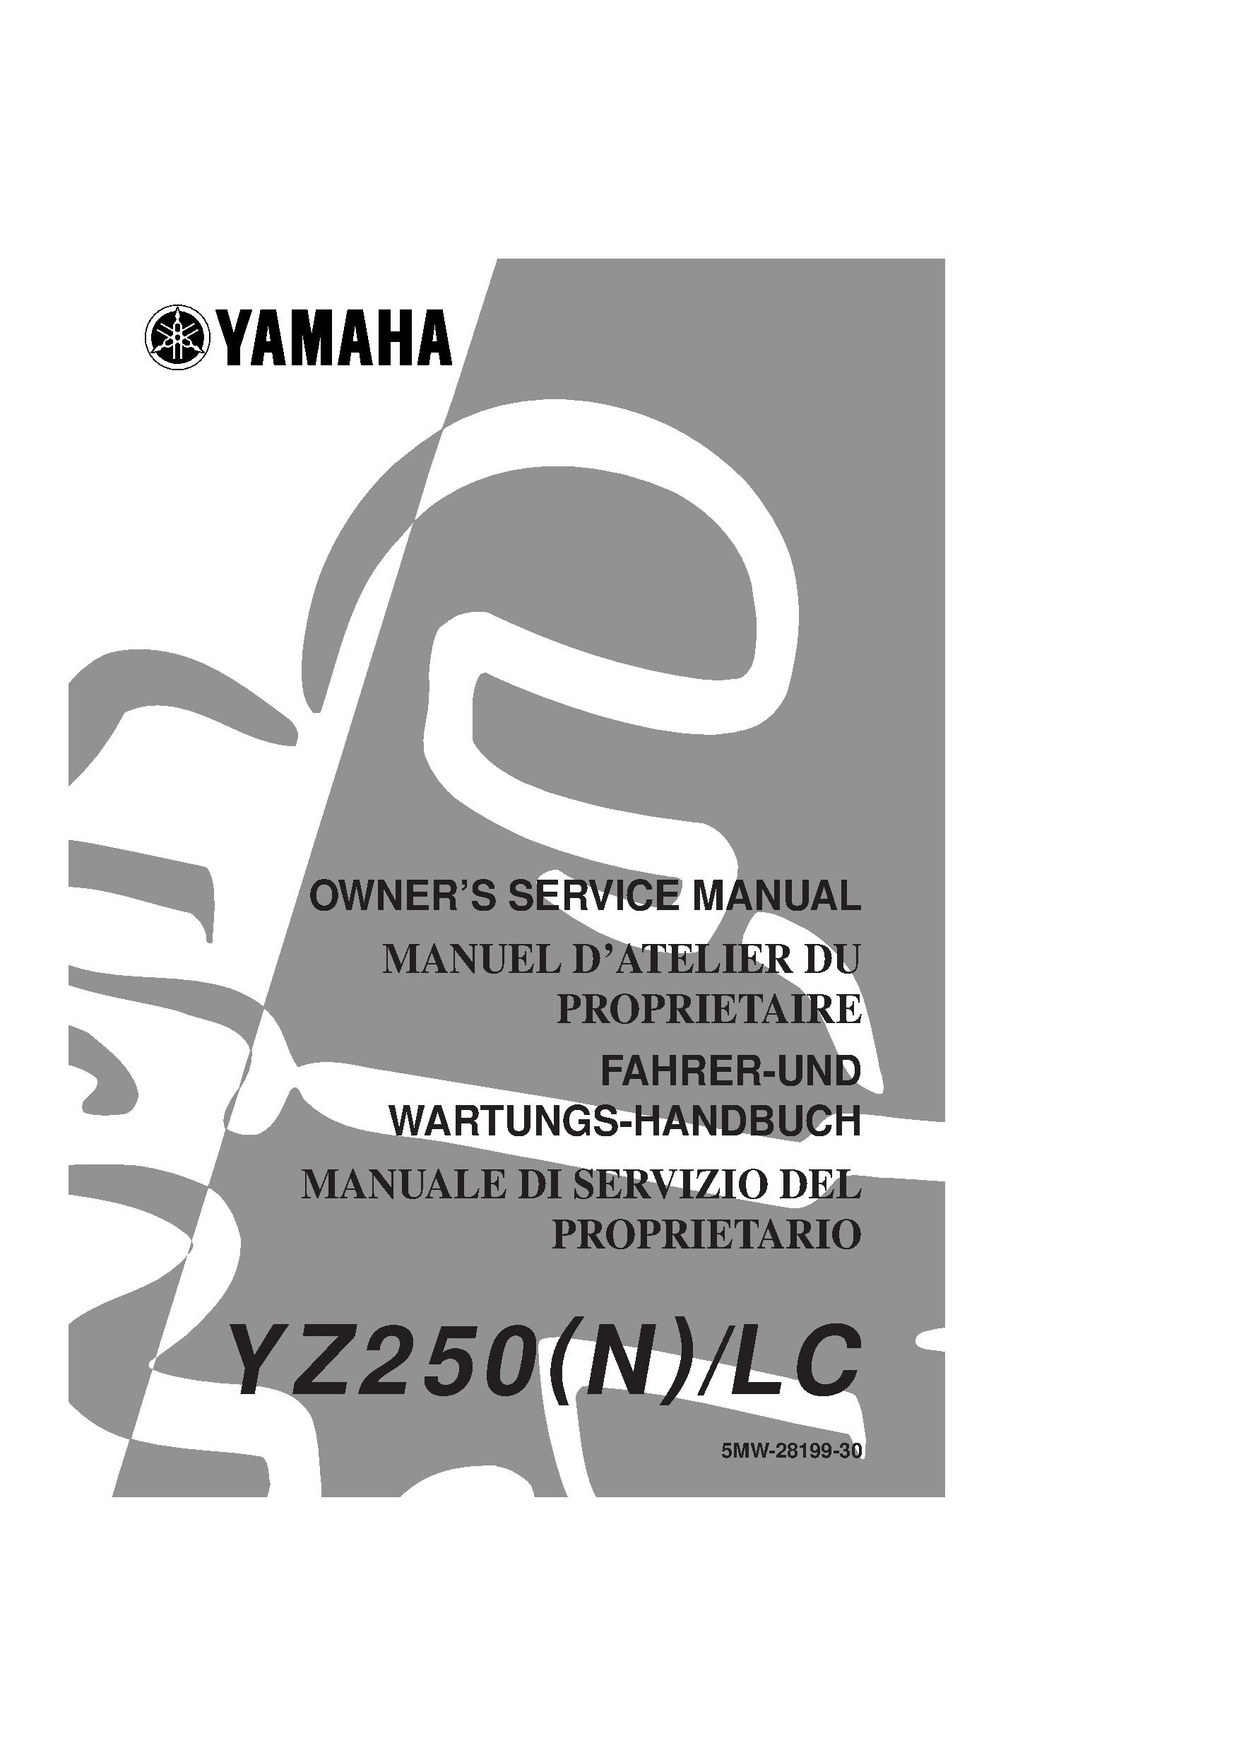 File:2001 Yamaha YZ250 (N) LC Owners Service Manual.pdf